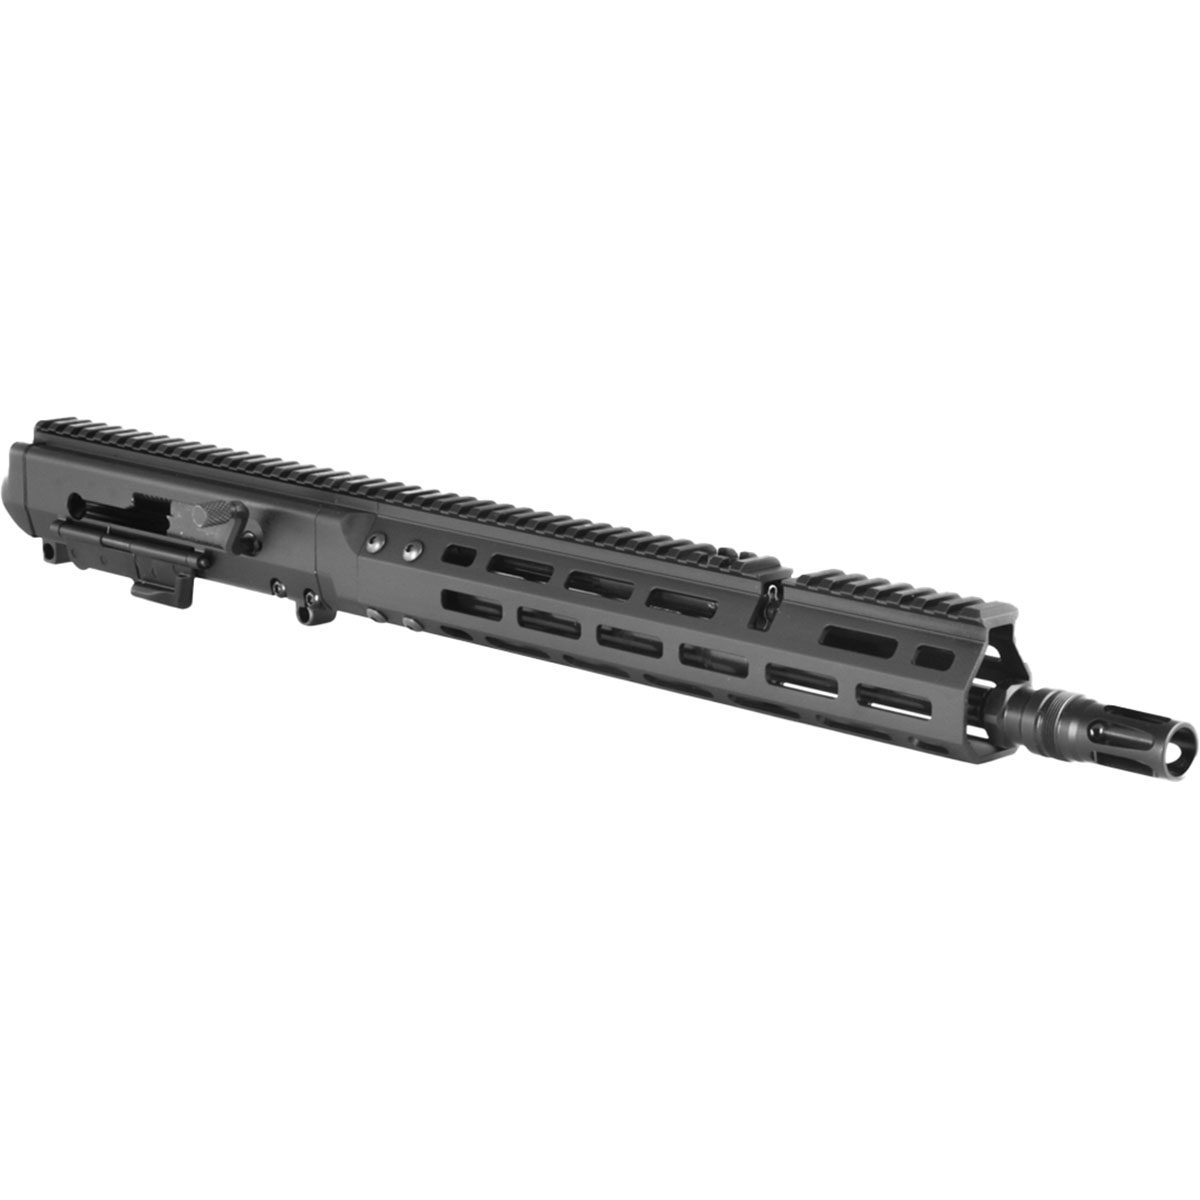 BROWNELLS - BRN-180S UPPER RECEIVERS WITH PIN & WELD FLASH HIDER